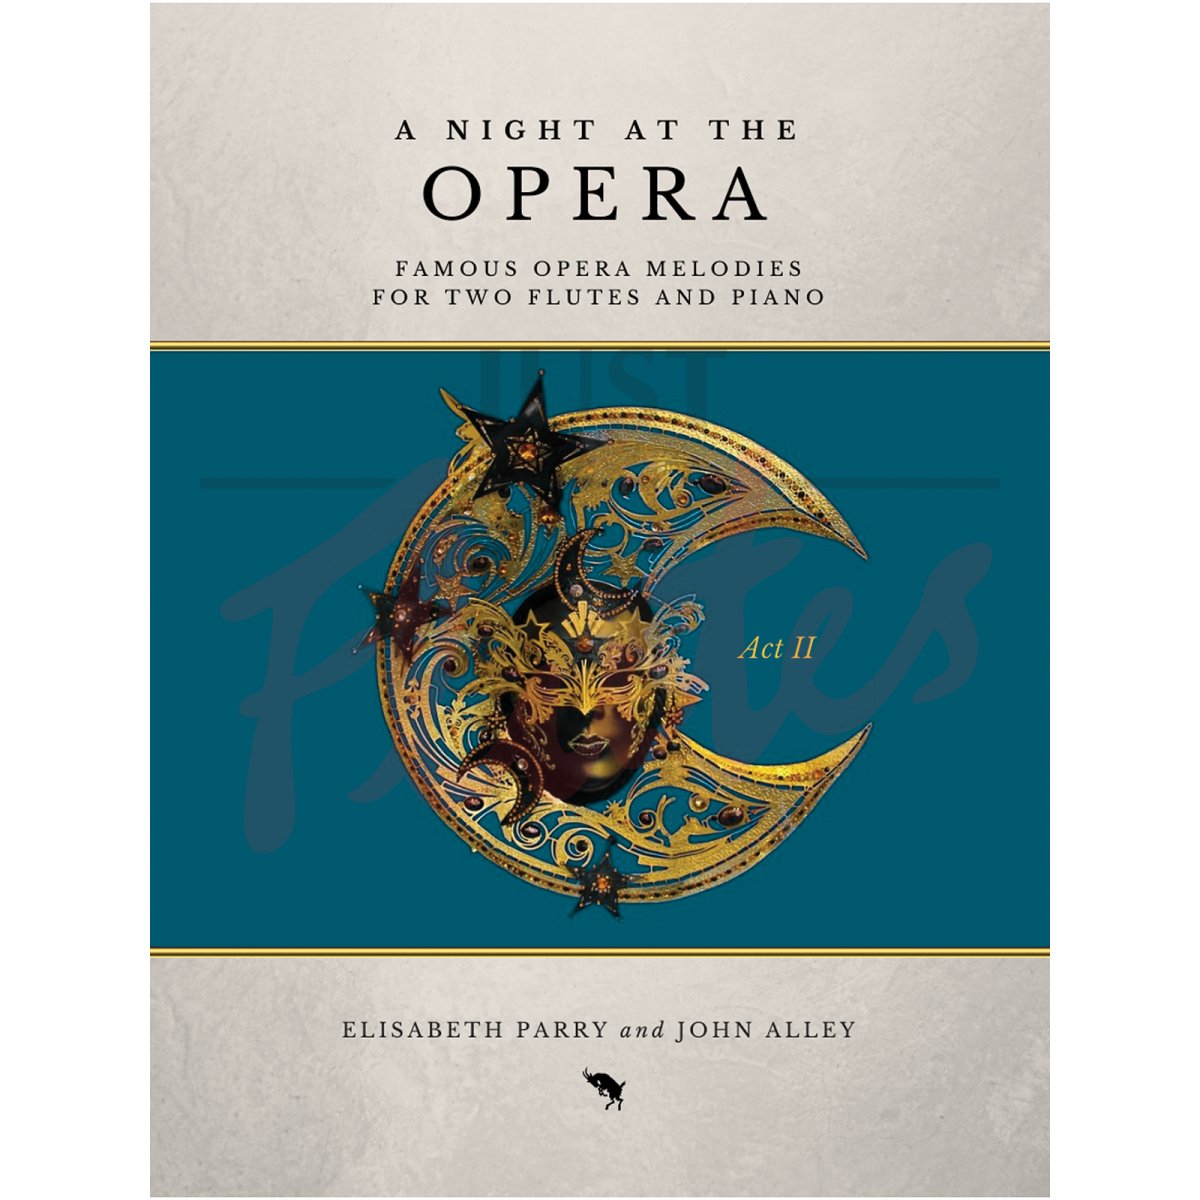 A Night at the Opera for Two Flutes and Piano, Act II